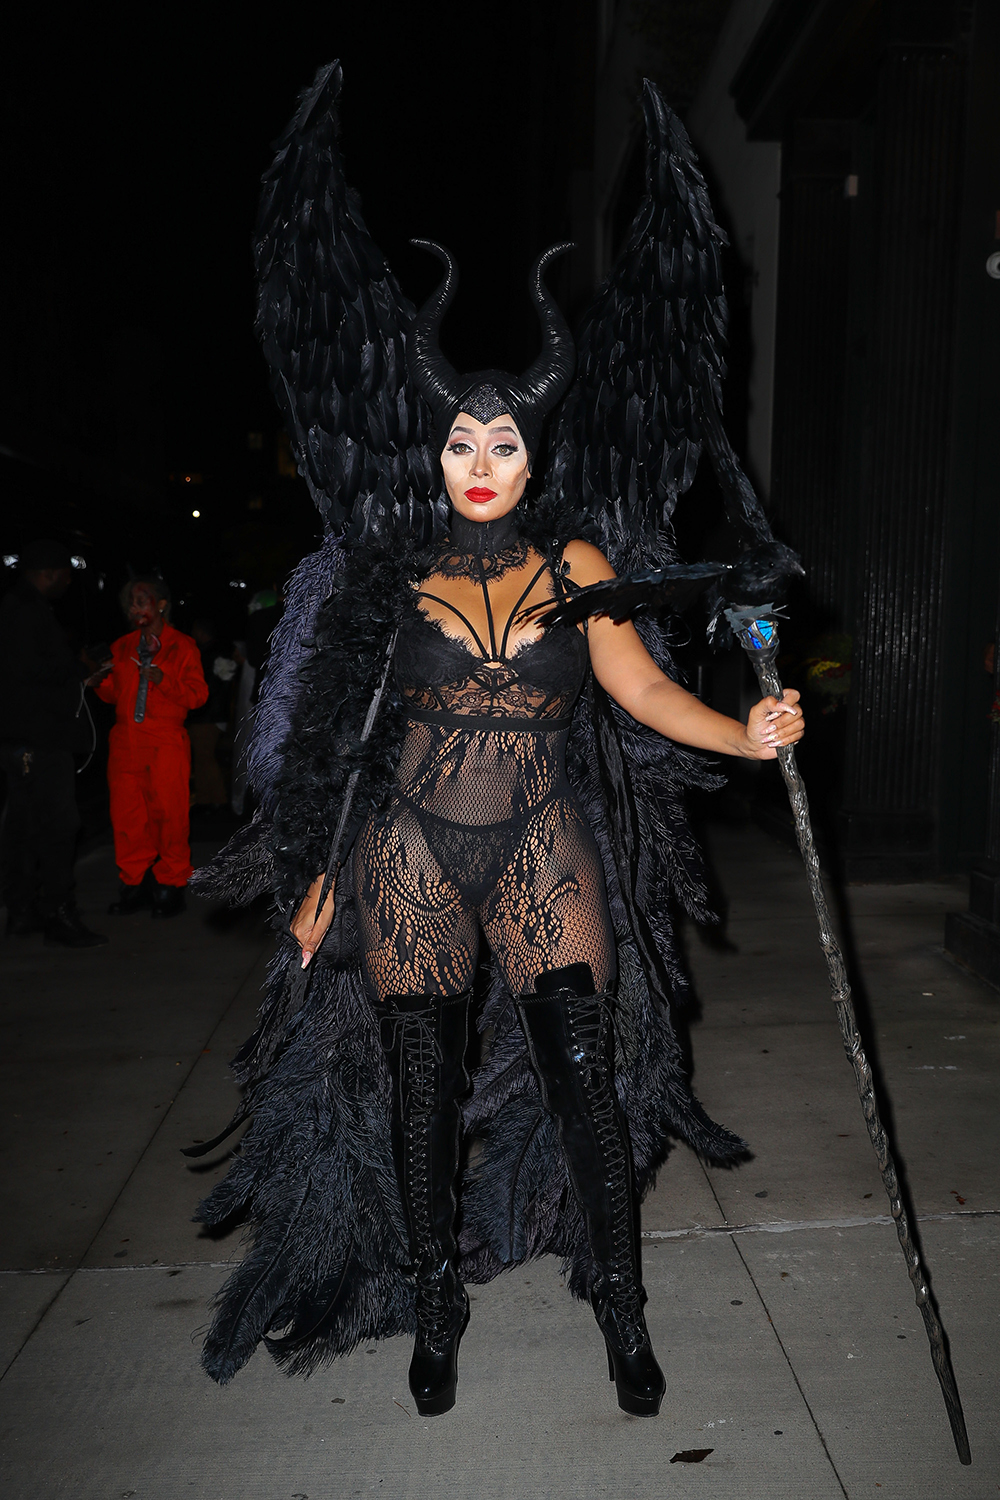 Celebrities In Lingerie For Halloween Costumes Photos pic